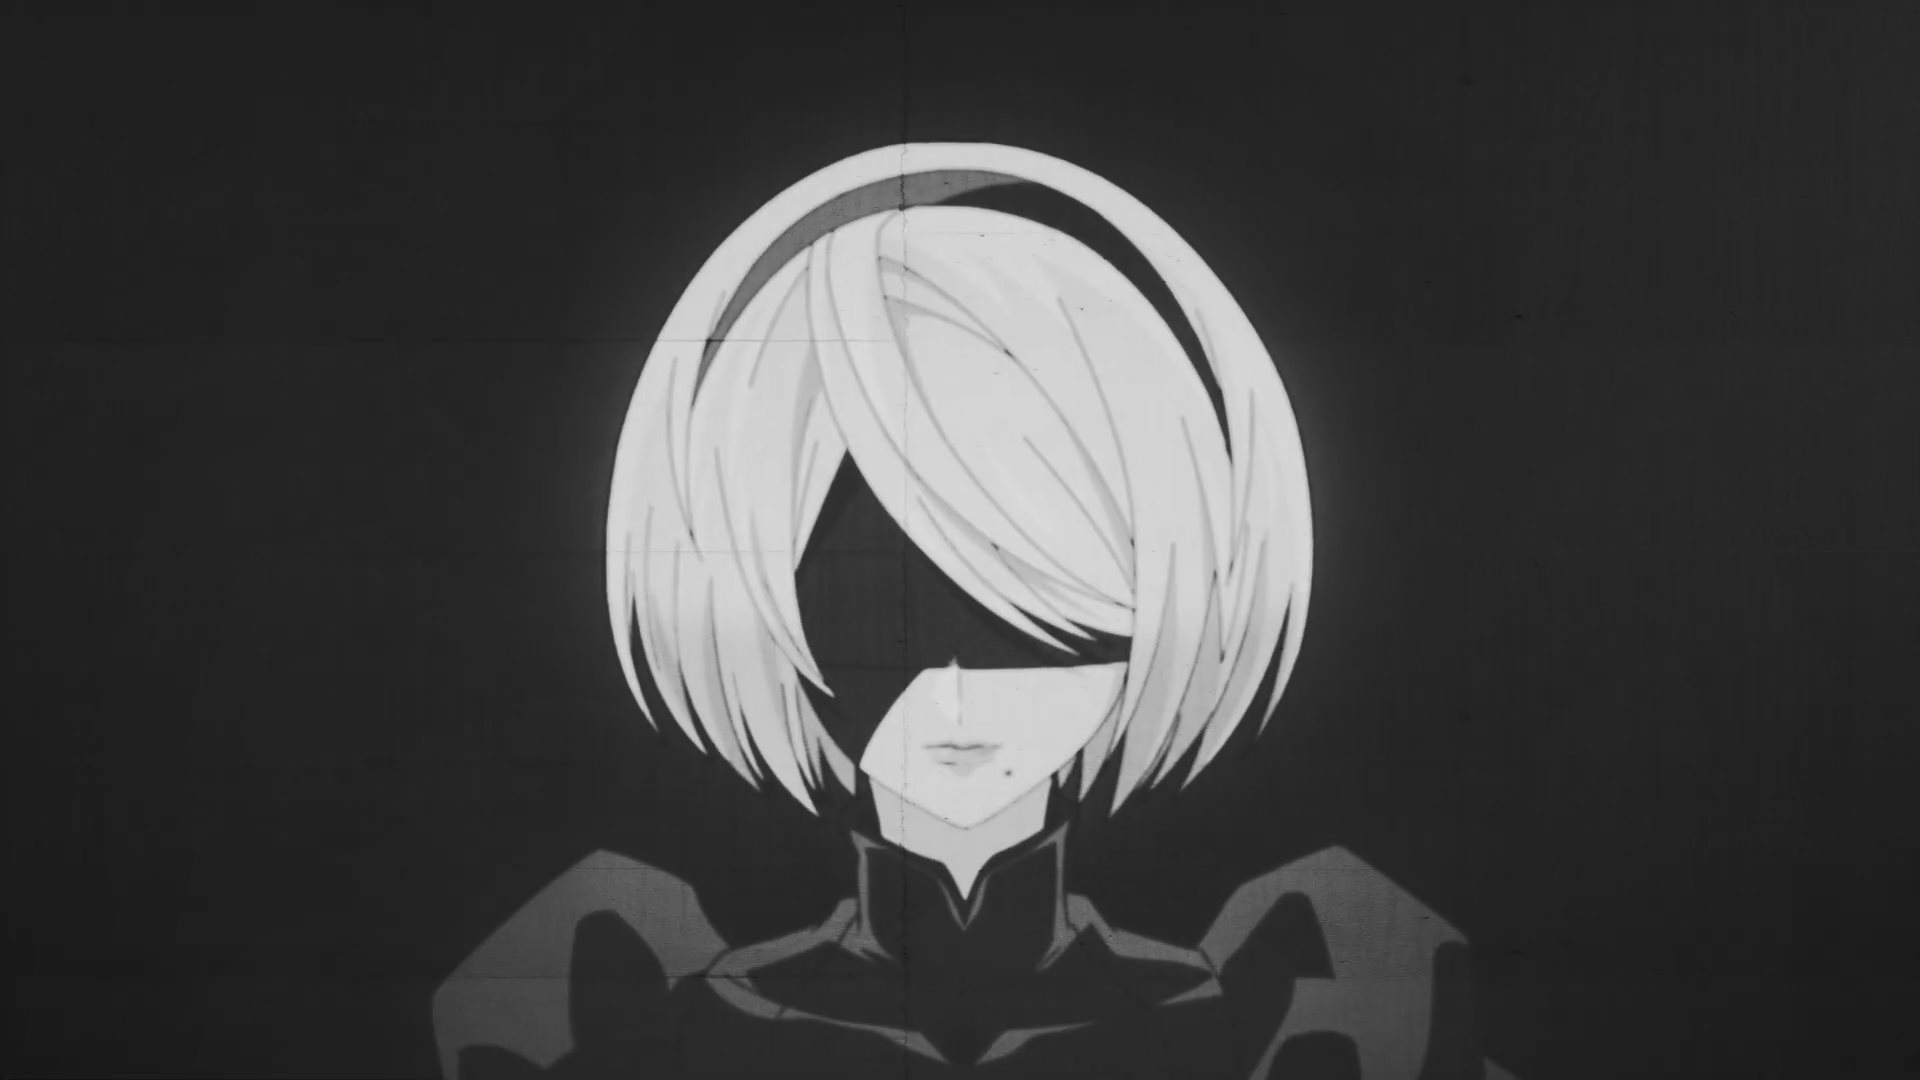 NieR:Automata Ver1.1a' Uploads to Crunchyroll (New Character Trailers)